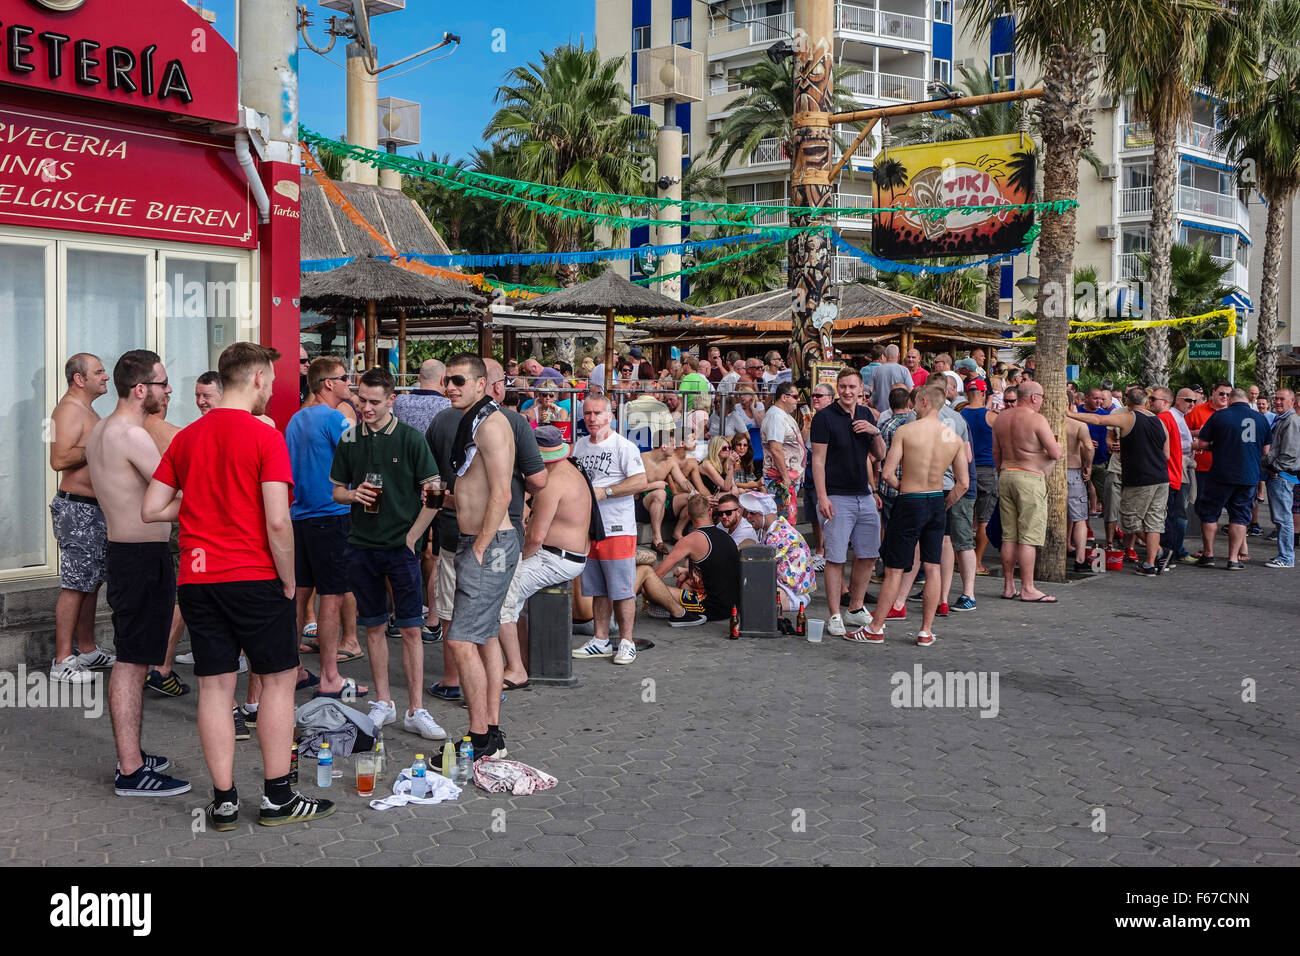 Benidorm, Spain. 13th November, 2015. England supporters begin to fill the bars in the resort of Benidorm, north of Alicante. The Spain versus England friendly match is due to kick off tonight, Friday in Alicante. Crowds outside the beachfront Tiki bar Credit:  Mick Flynn/Alamy Live News Stock Photo